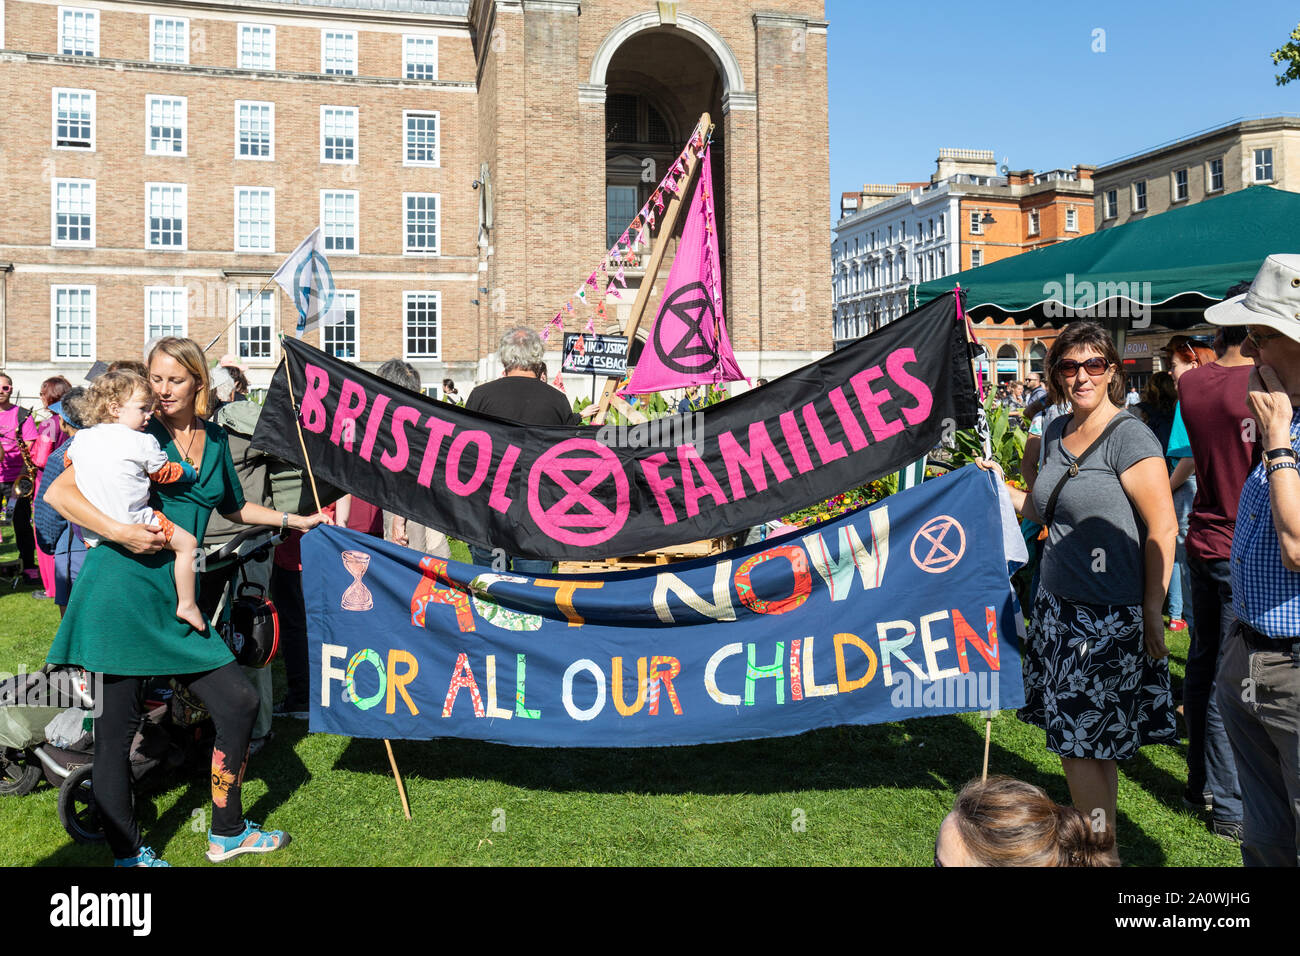 Many hundreds of schoolchildren & adults marched through the centre of Bristol demanding action on climate change. Part of a world-wide day of action. Stock Photo